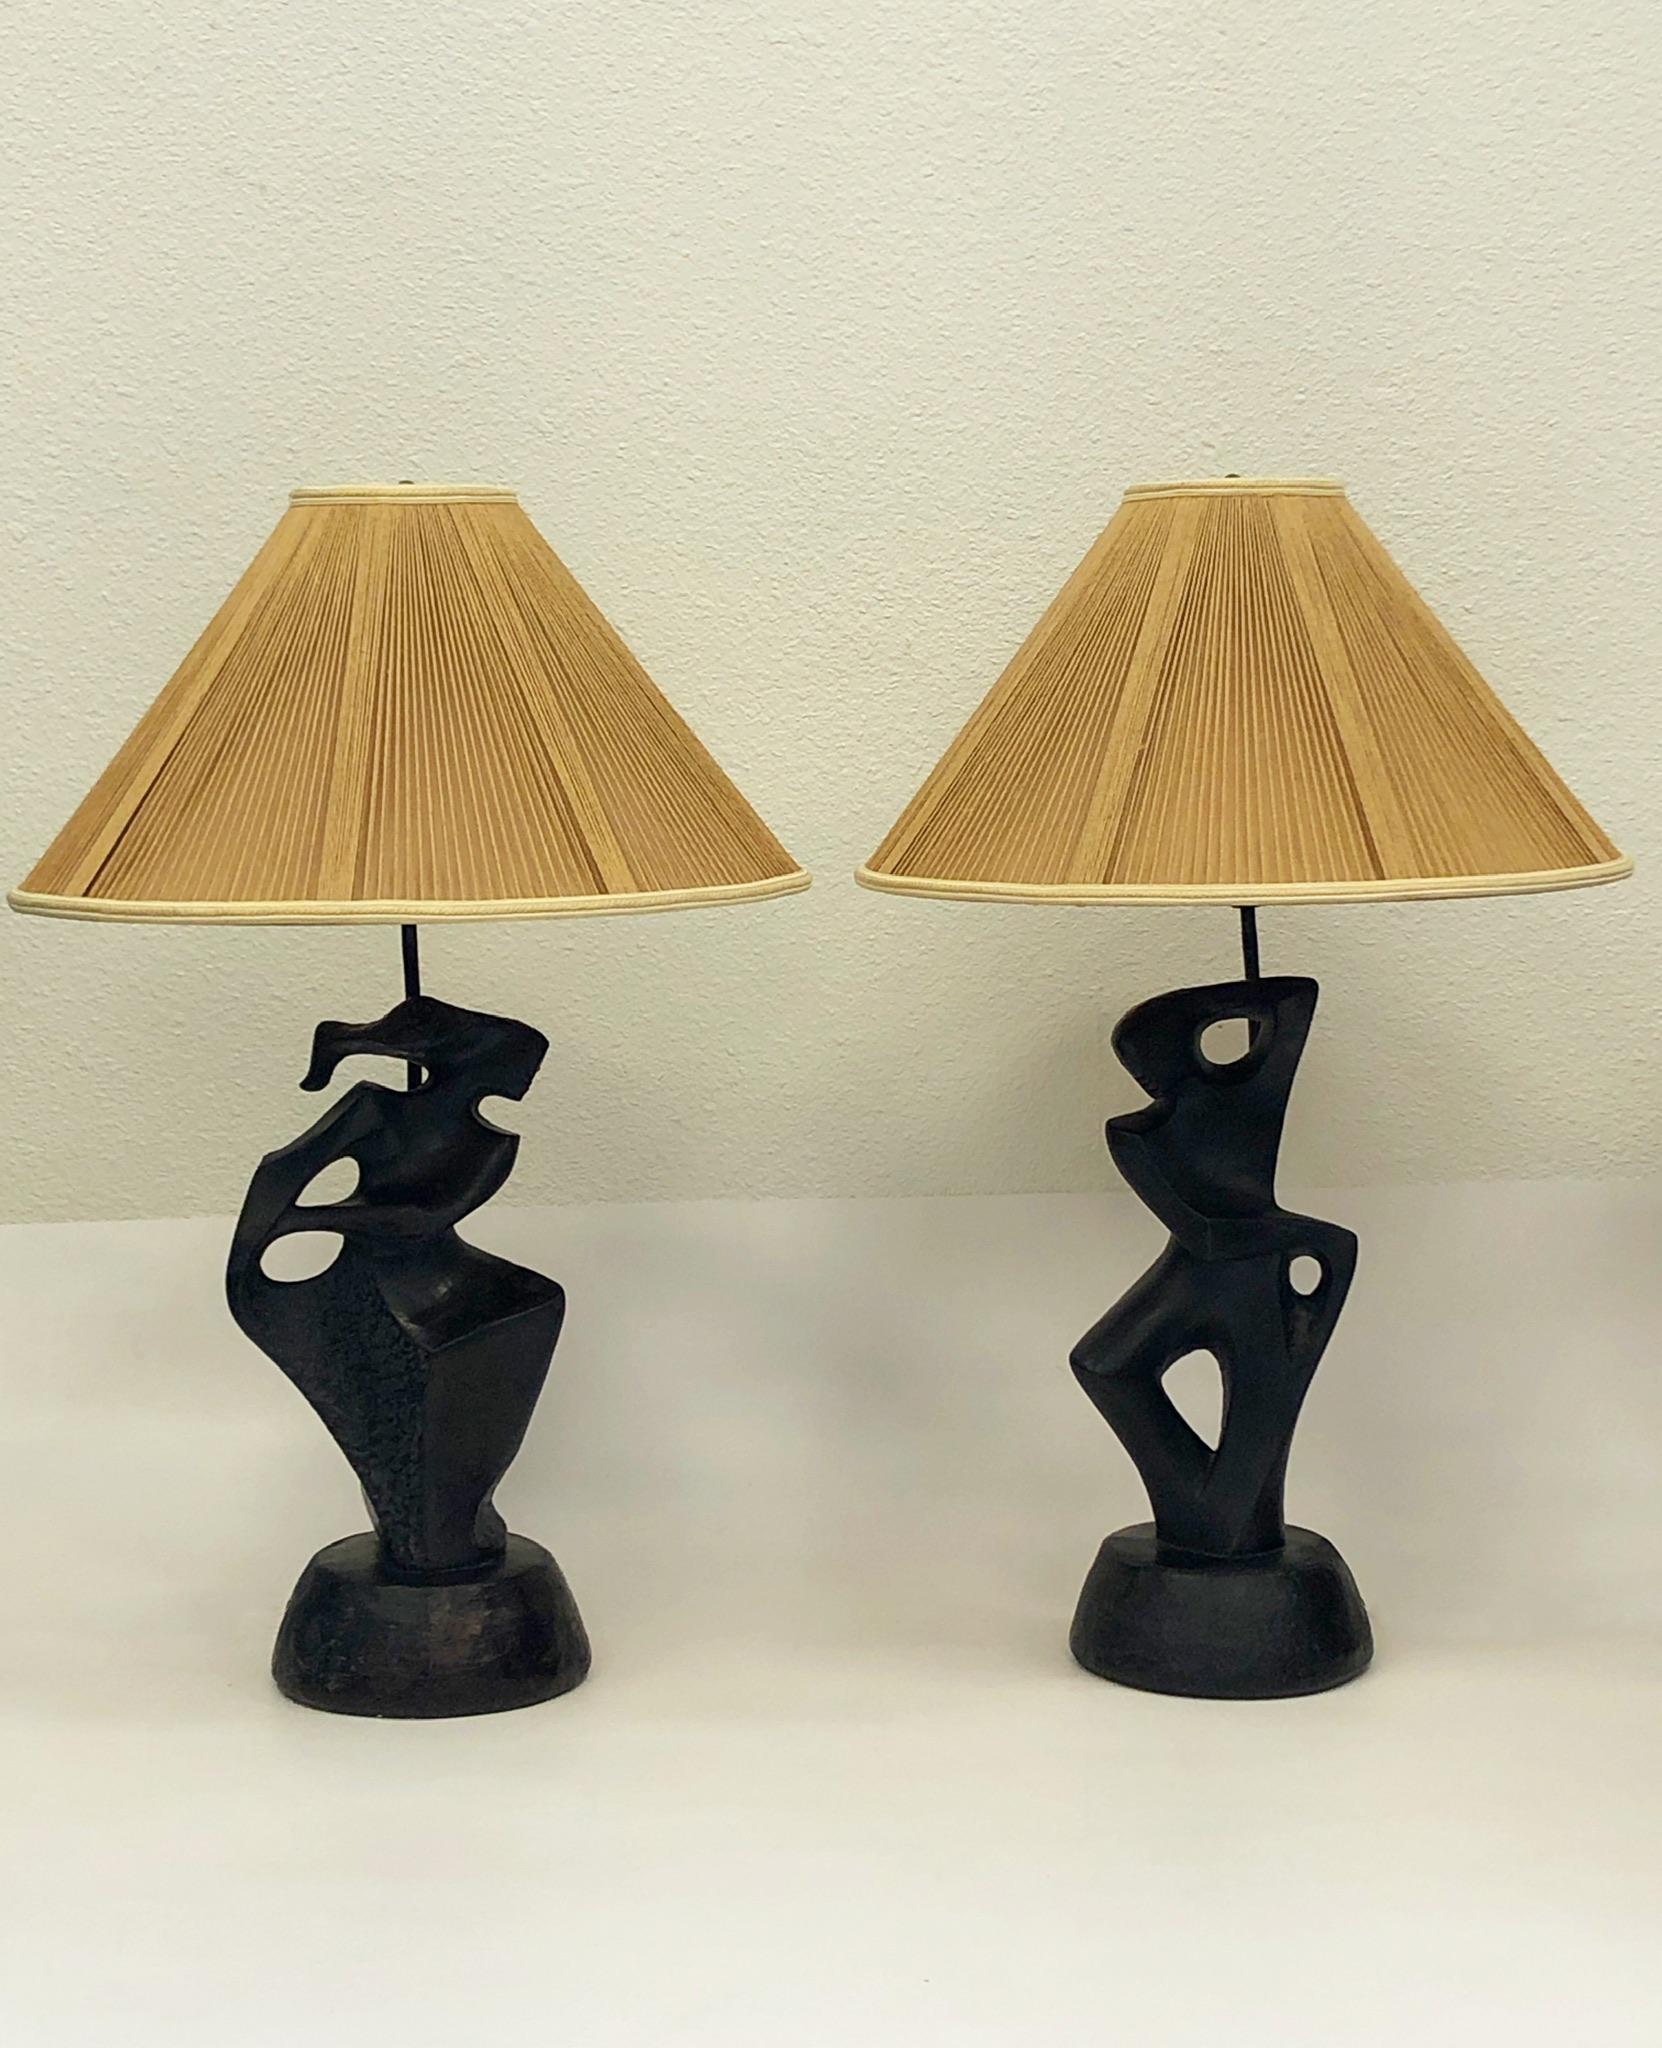 A spectacular pair of sculptural plaster male and female table lamps by Marianna von Allesch for RIMA, NY.
The lamps are cast plaster that’s black lacquered. The lamps have been newly rewired with new black cloth covered cord. The sockets are